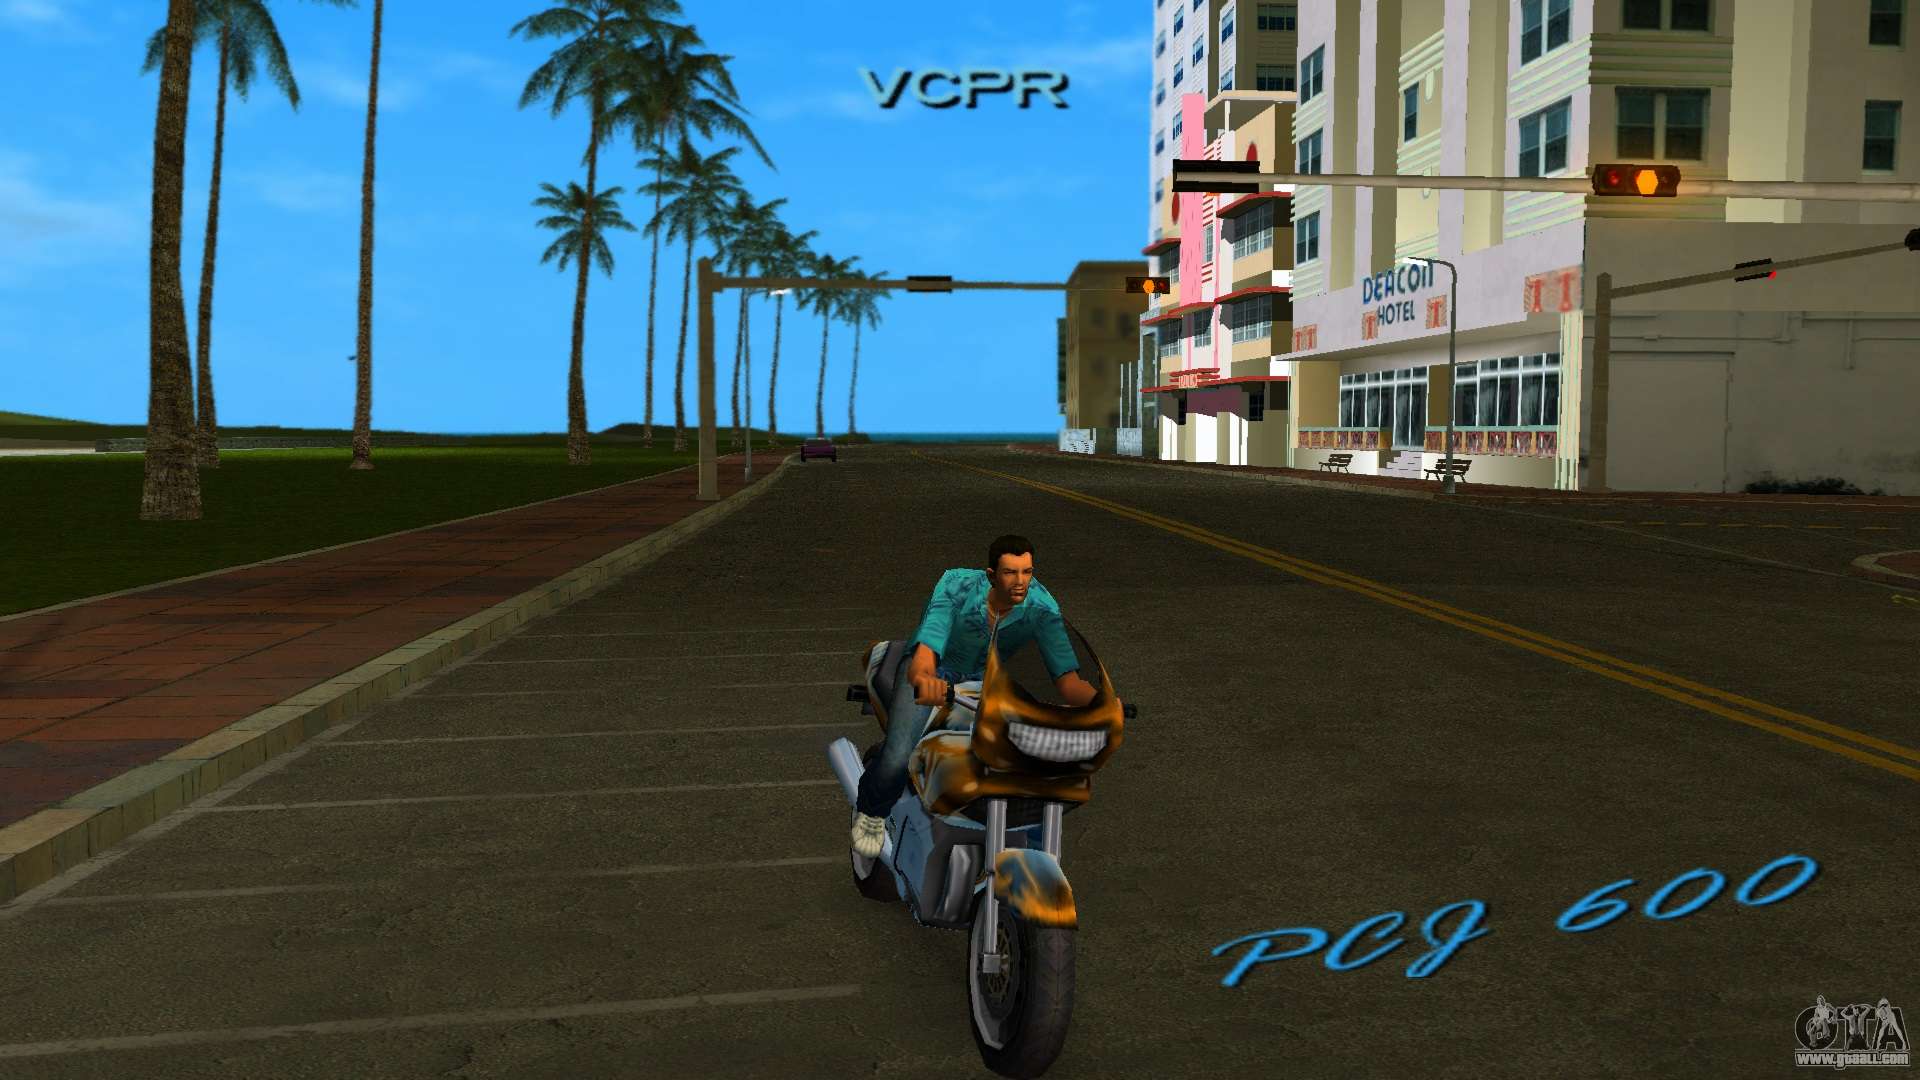 PCJ-600 from Grand Theft Auto 4 for GTA Vice City